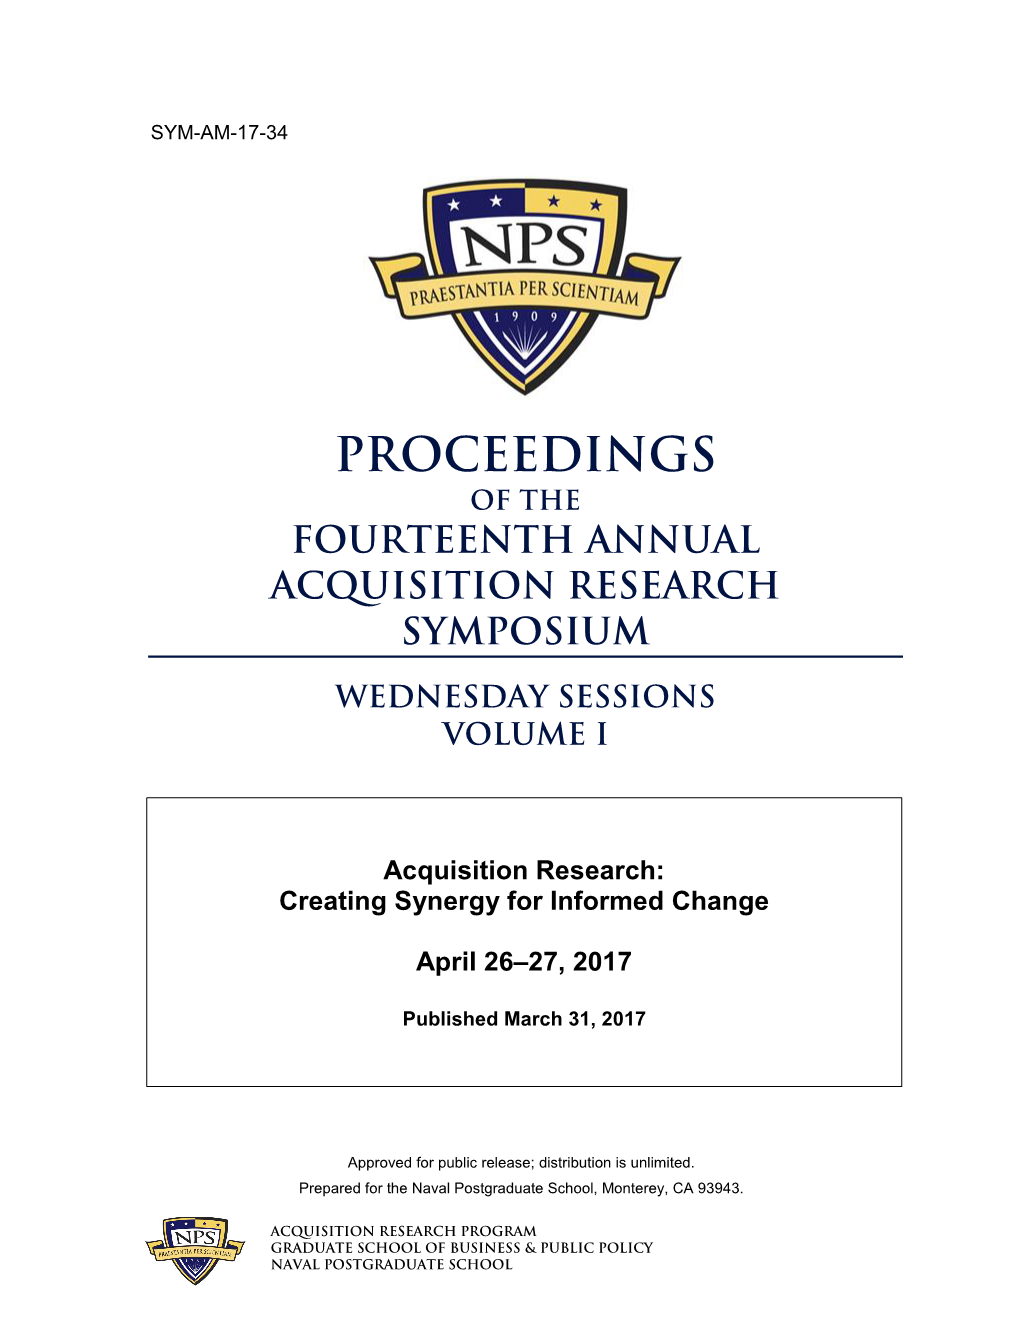 NPS Proceedings of the 14Th Annual Acquisition Research